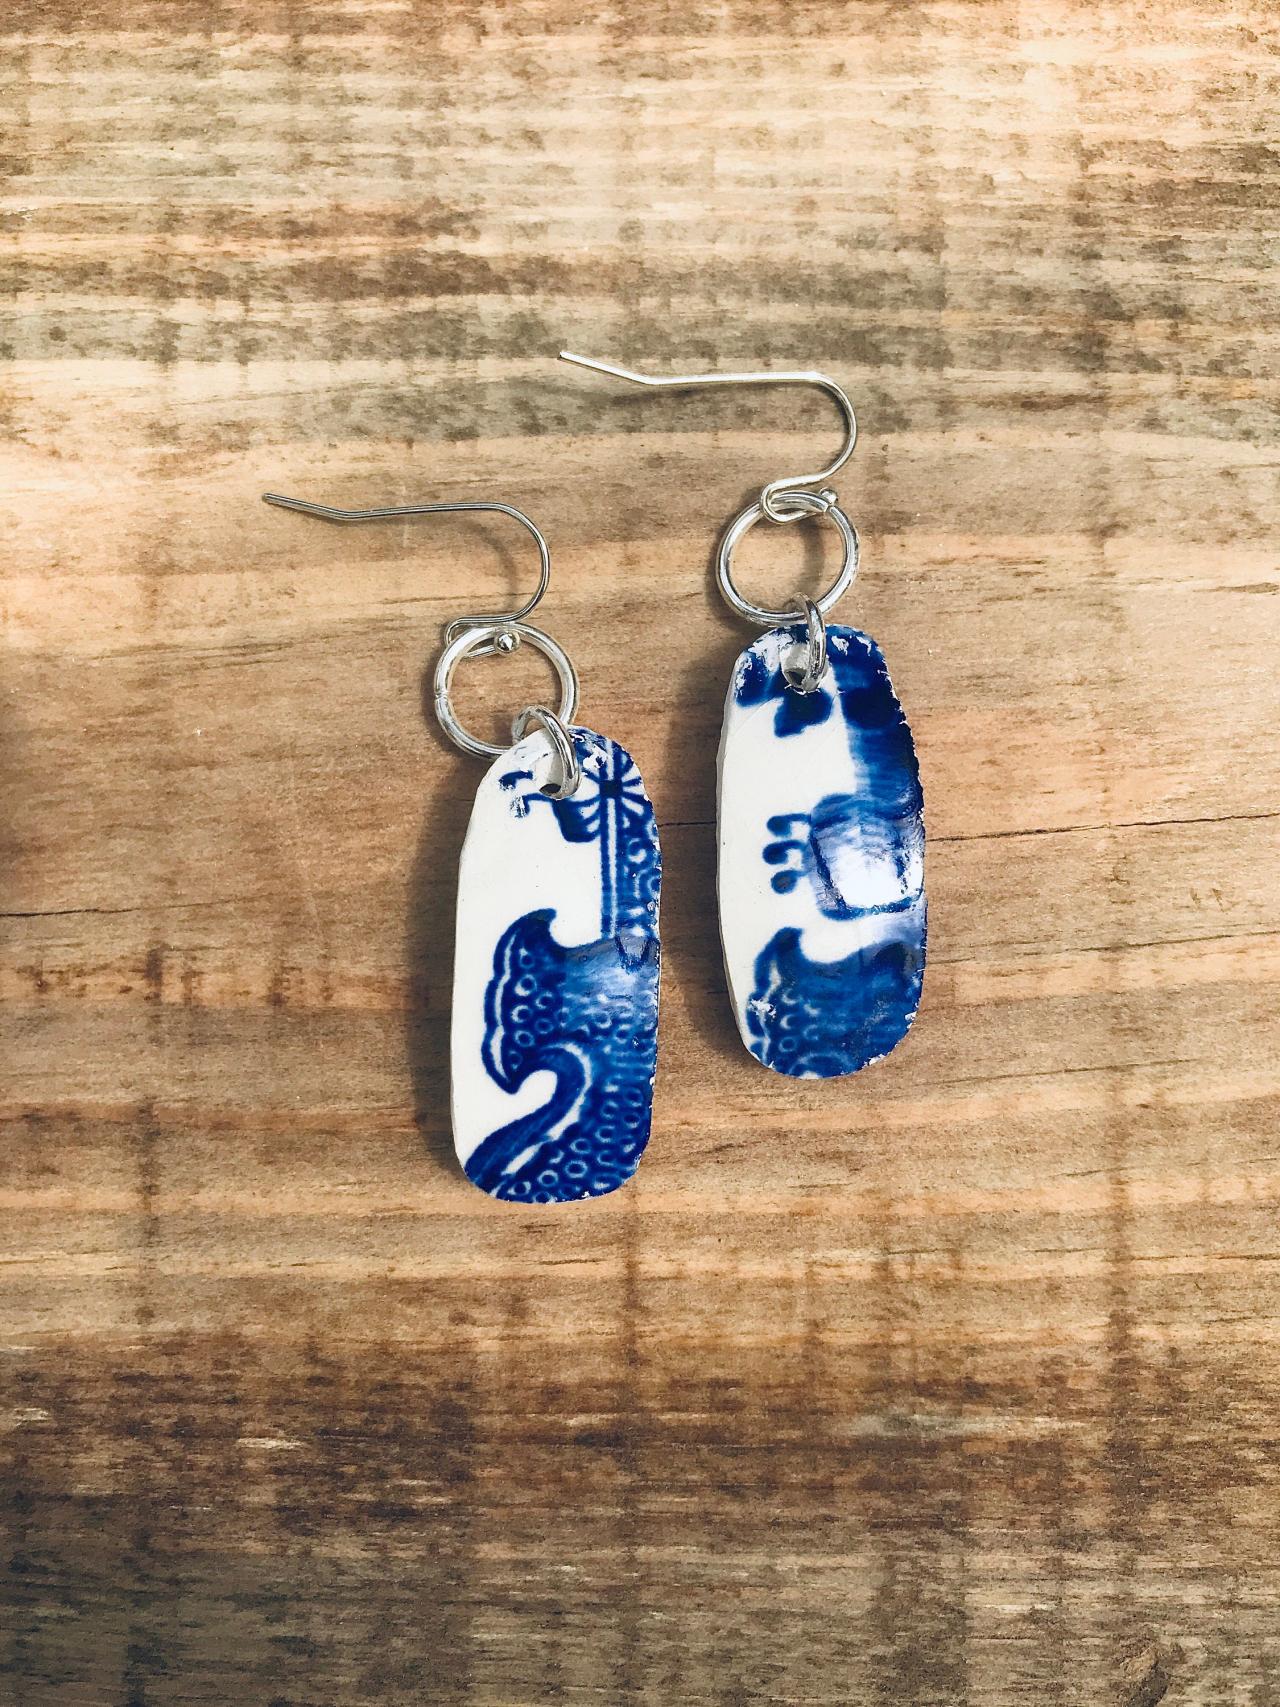 Sweet Vintage Willow Pattern Blue & White China Earrings.